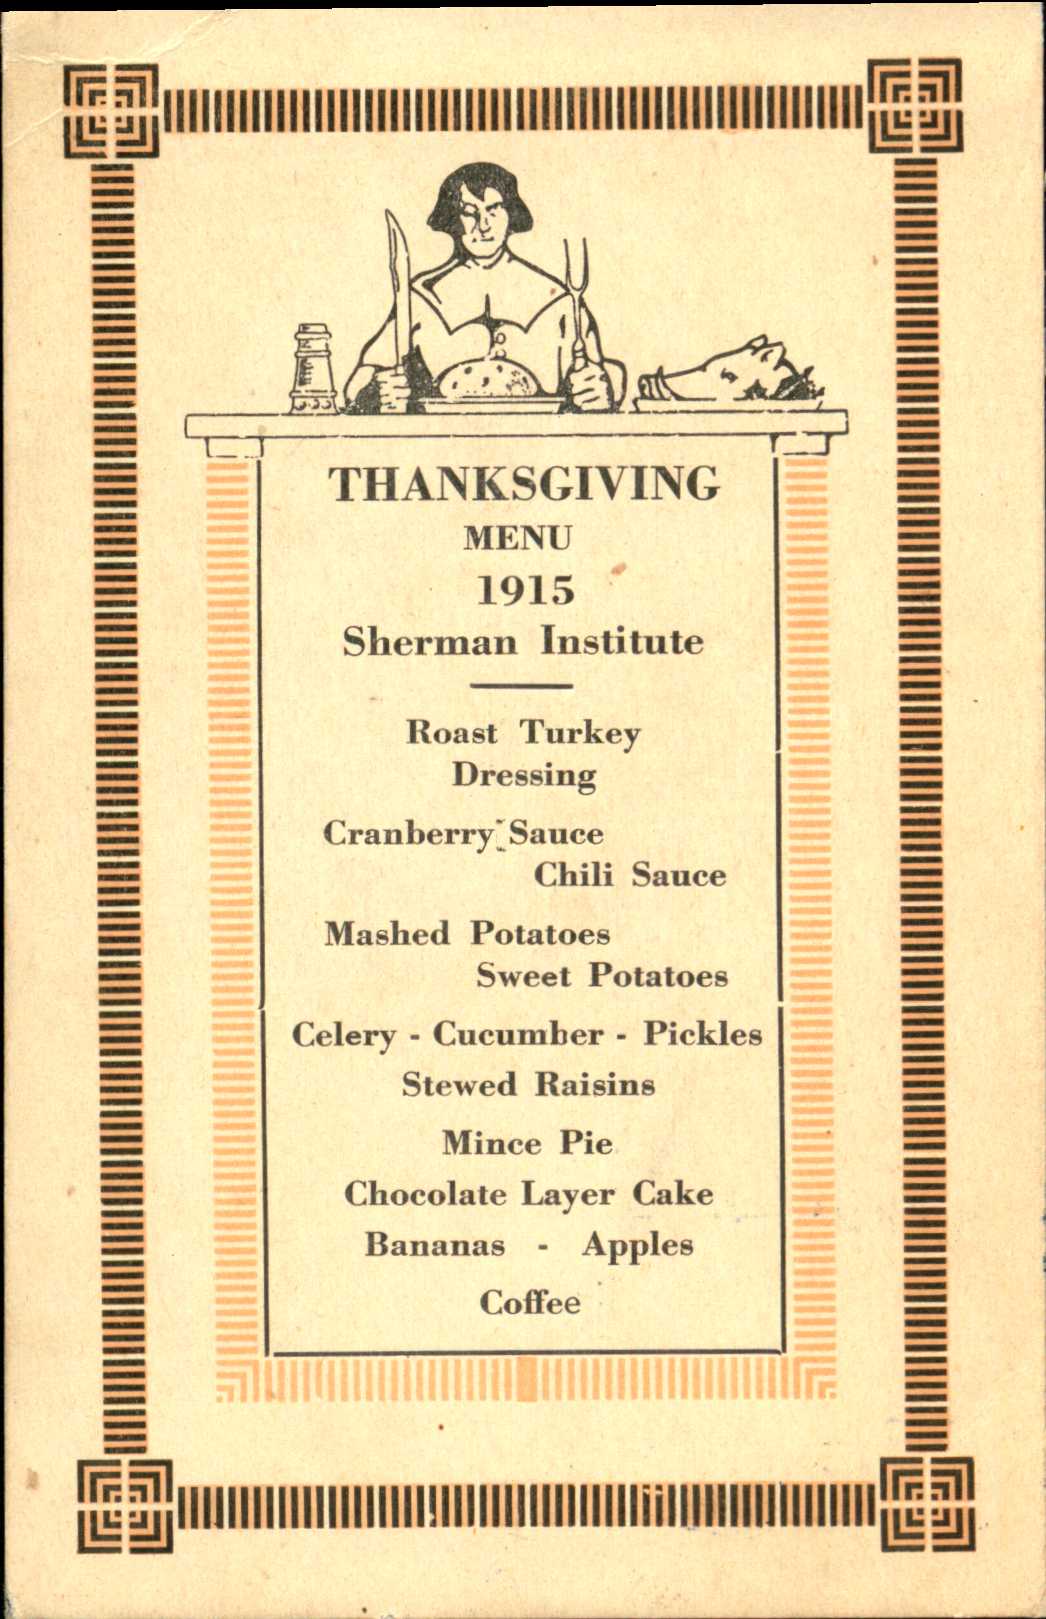 Menu shows an individual dressed as a pilgrim seated in front of a meal, below is the bill of fare